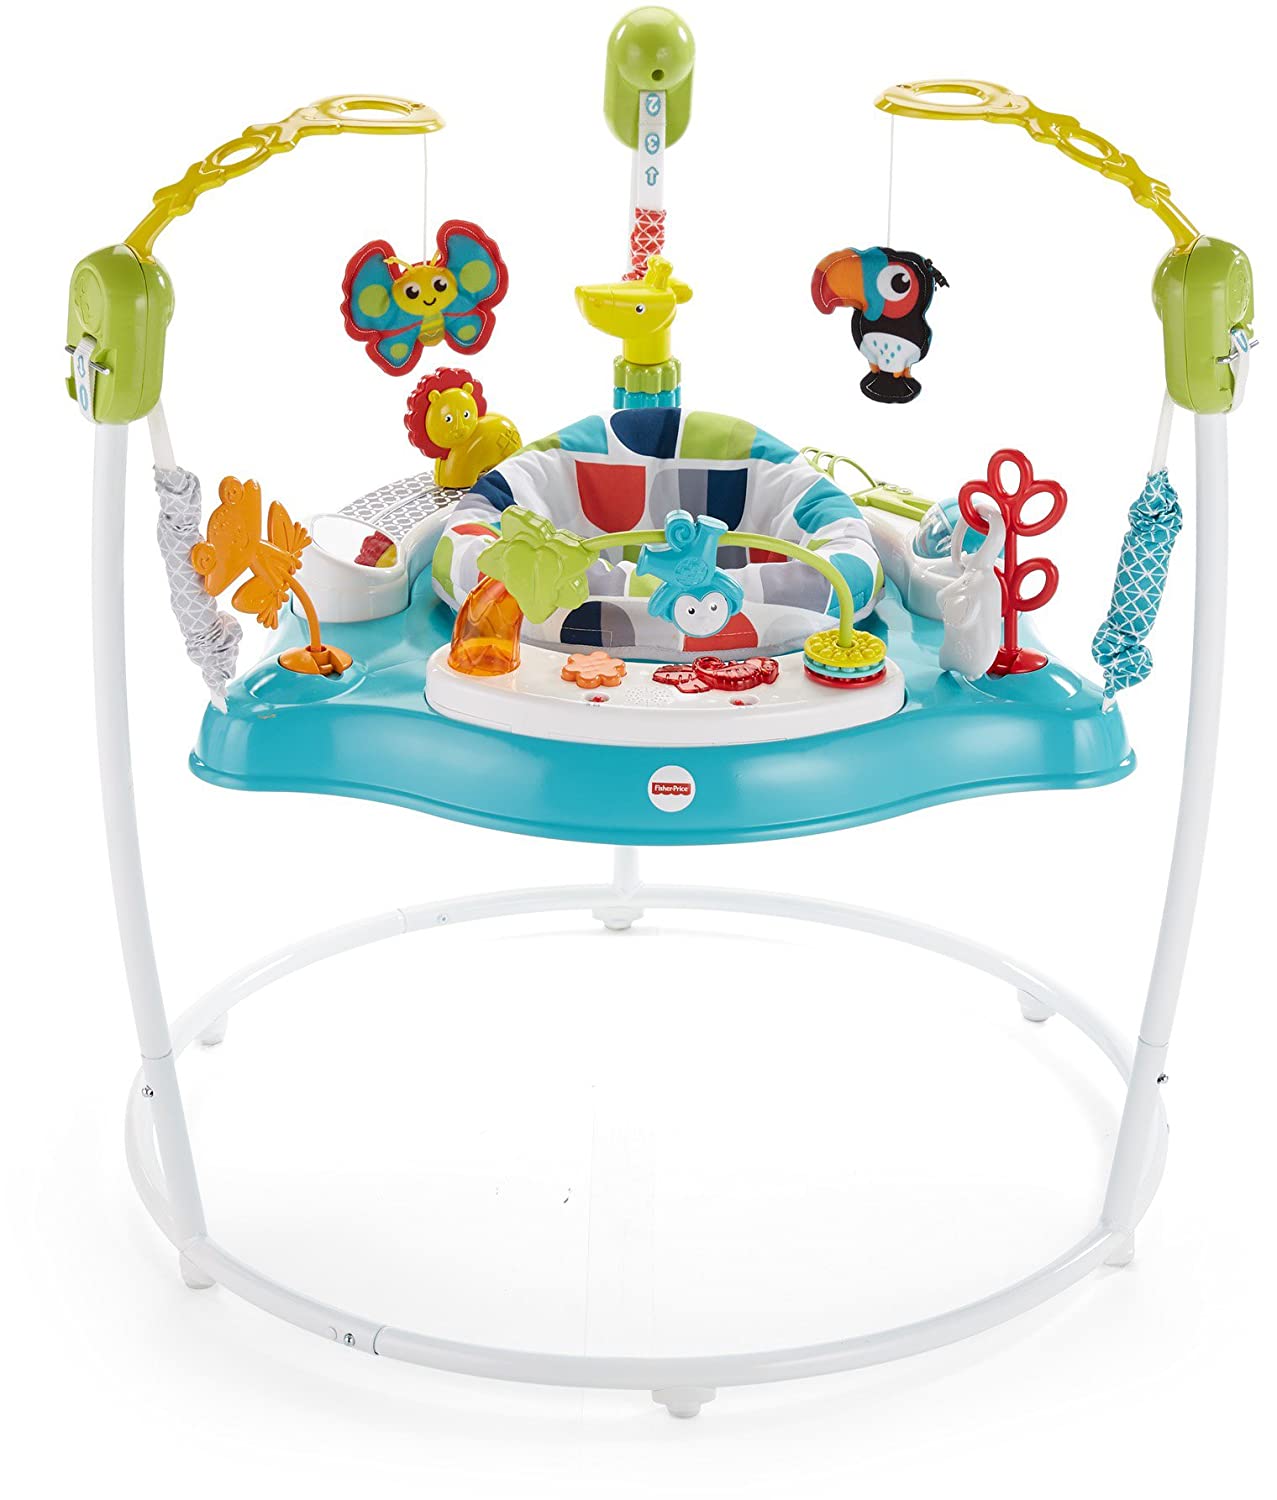 7 Best Fisher Price Jumperoo Reviews in 2022 6